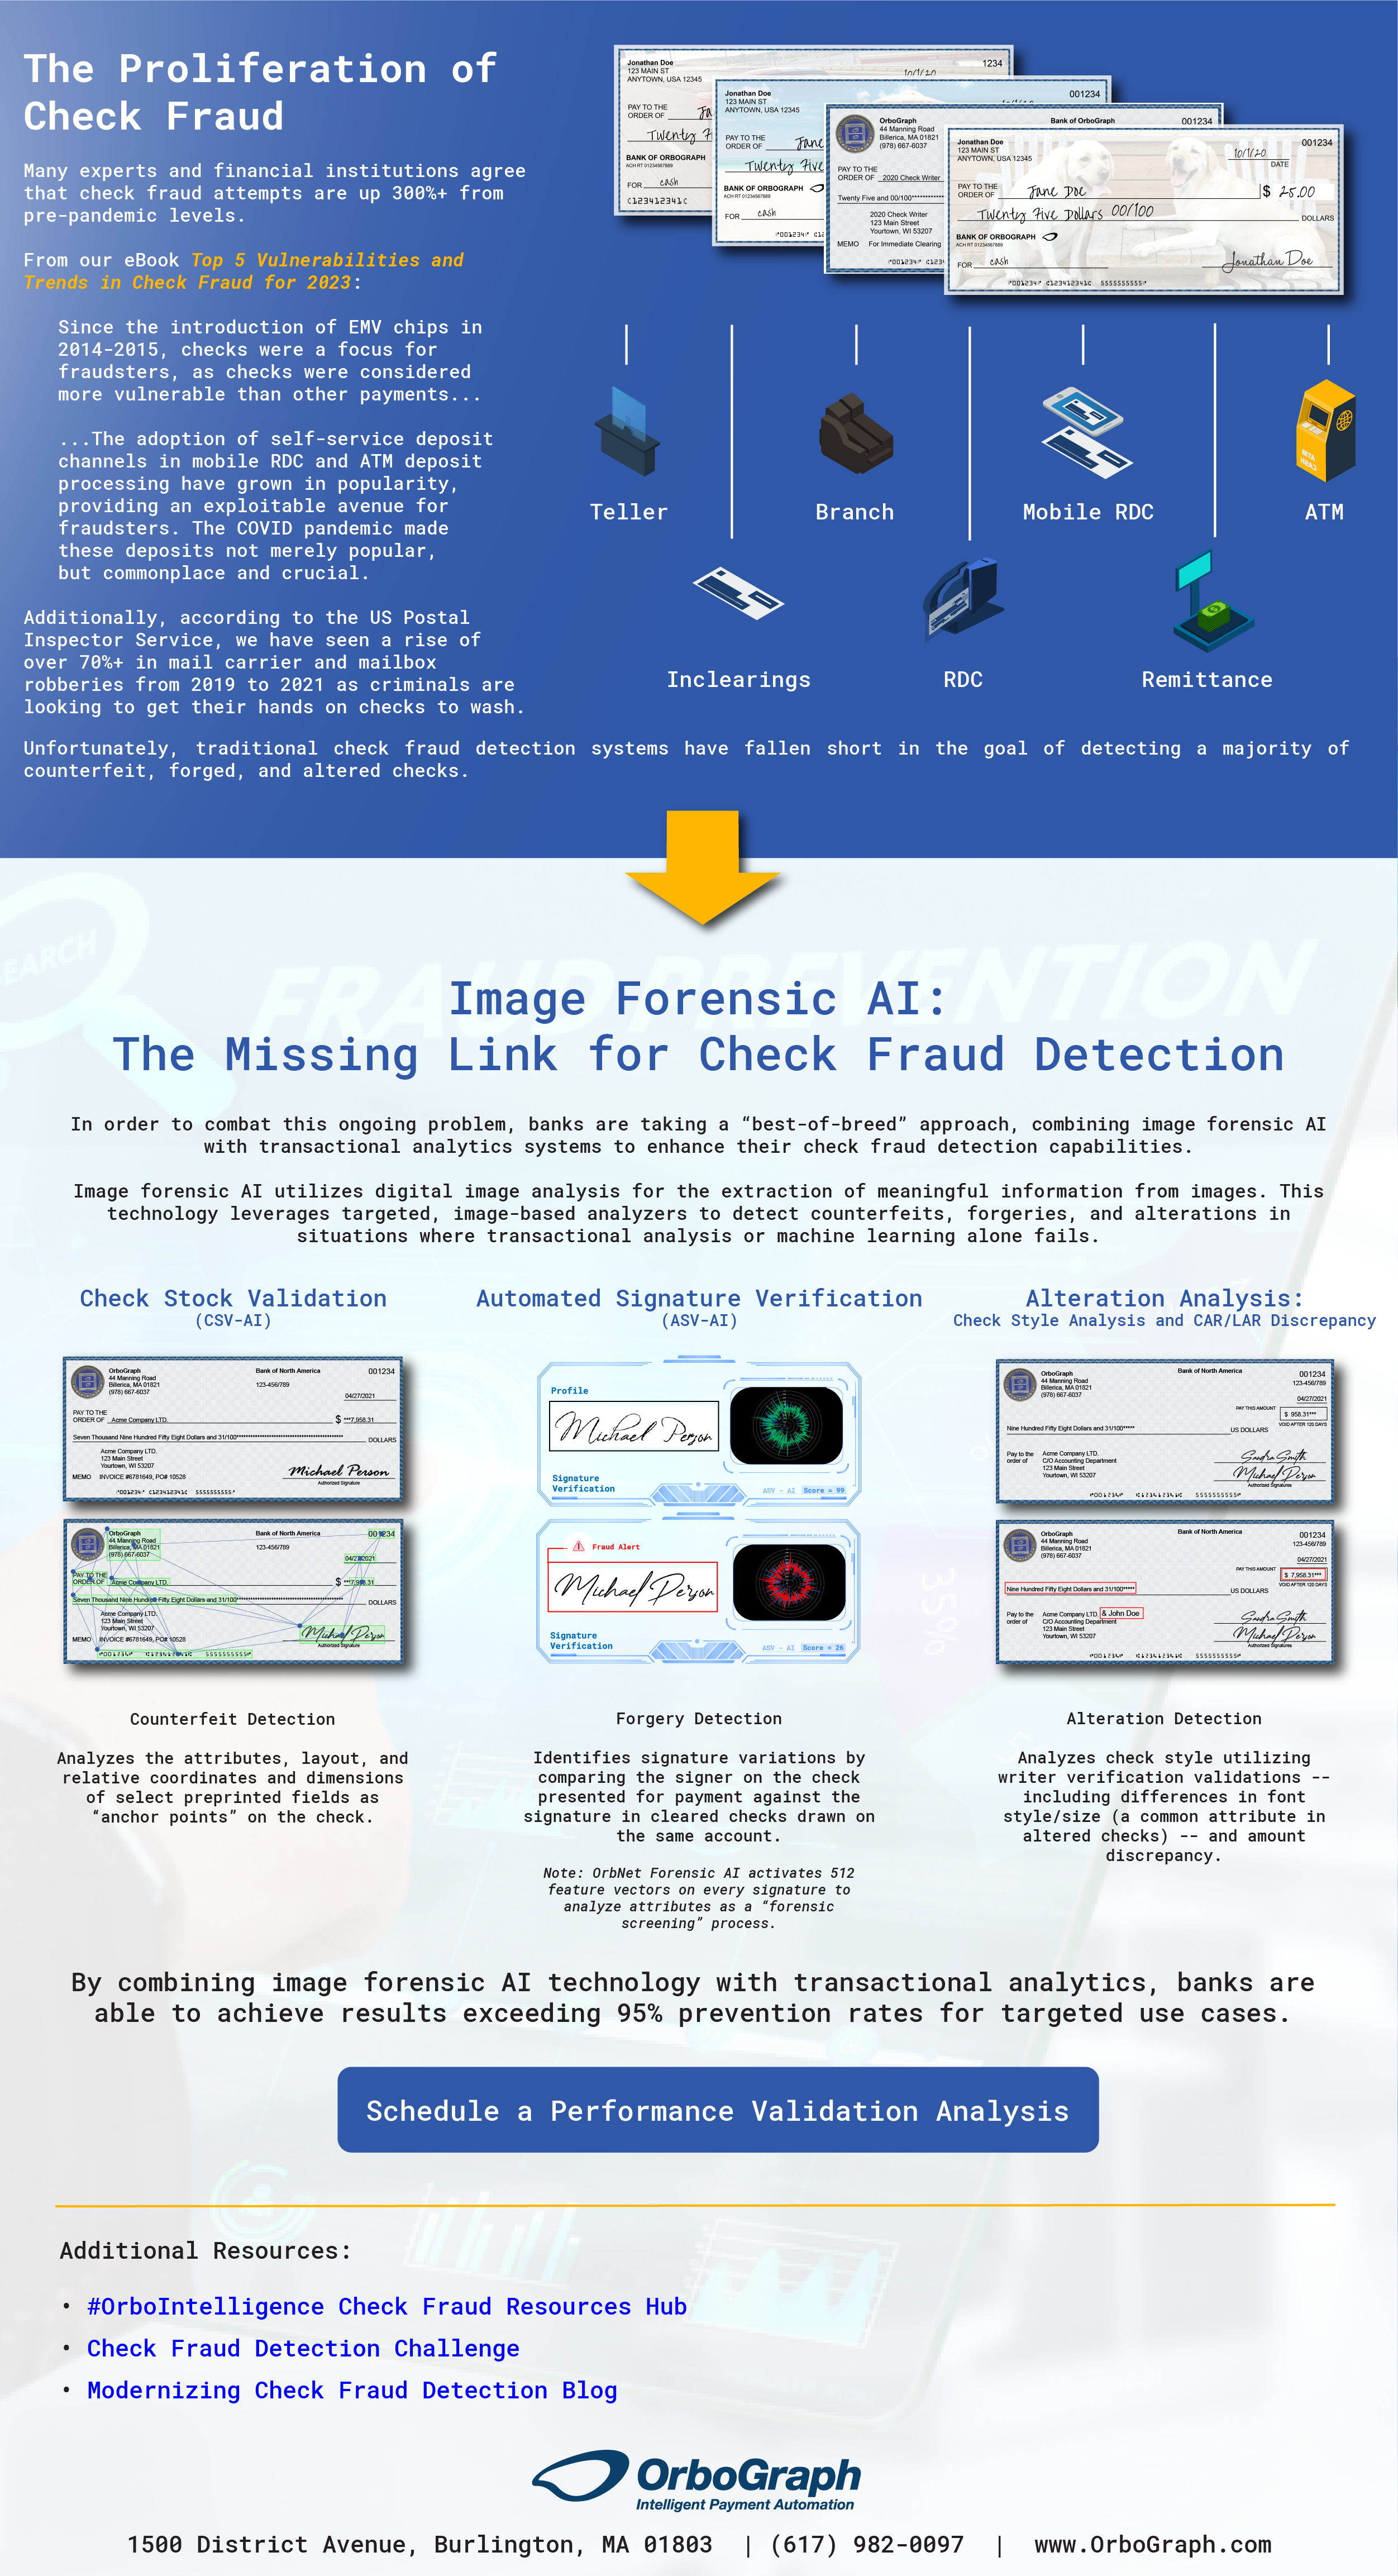 Infographic_The_Proliferation_of_Check_Fraud_FINAL-01